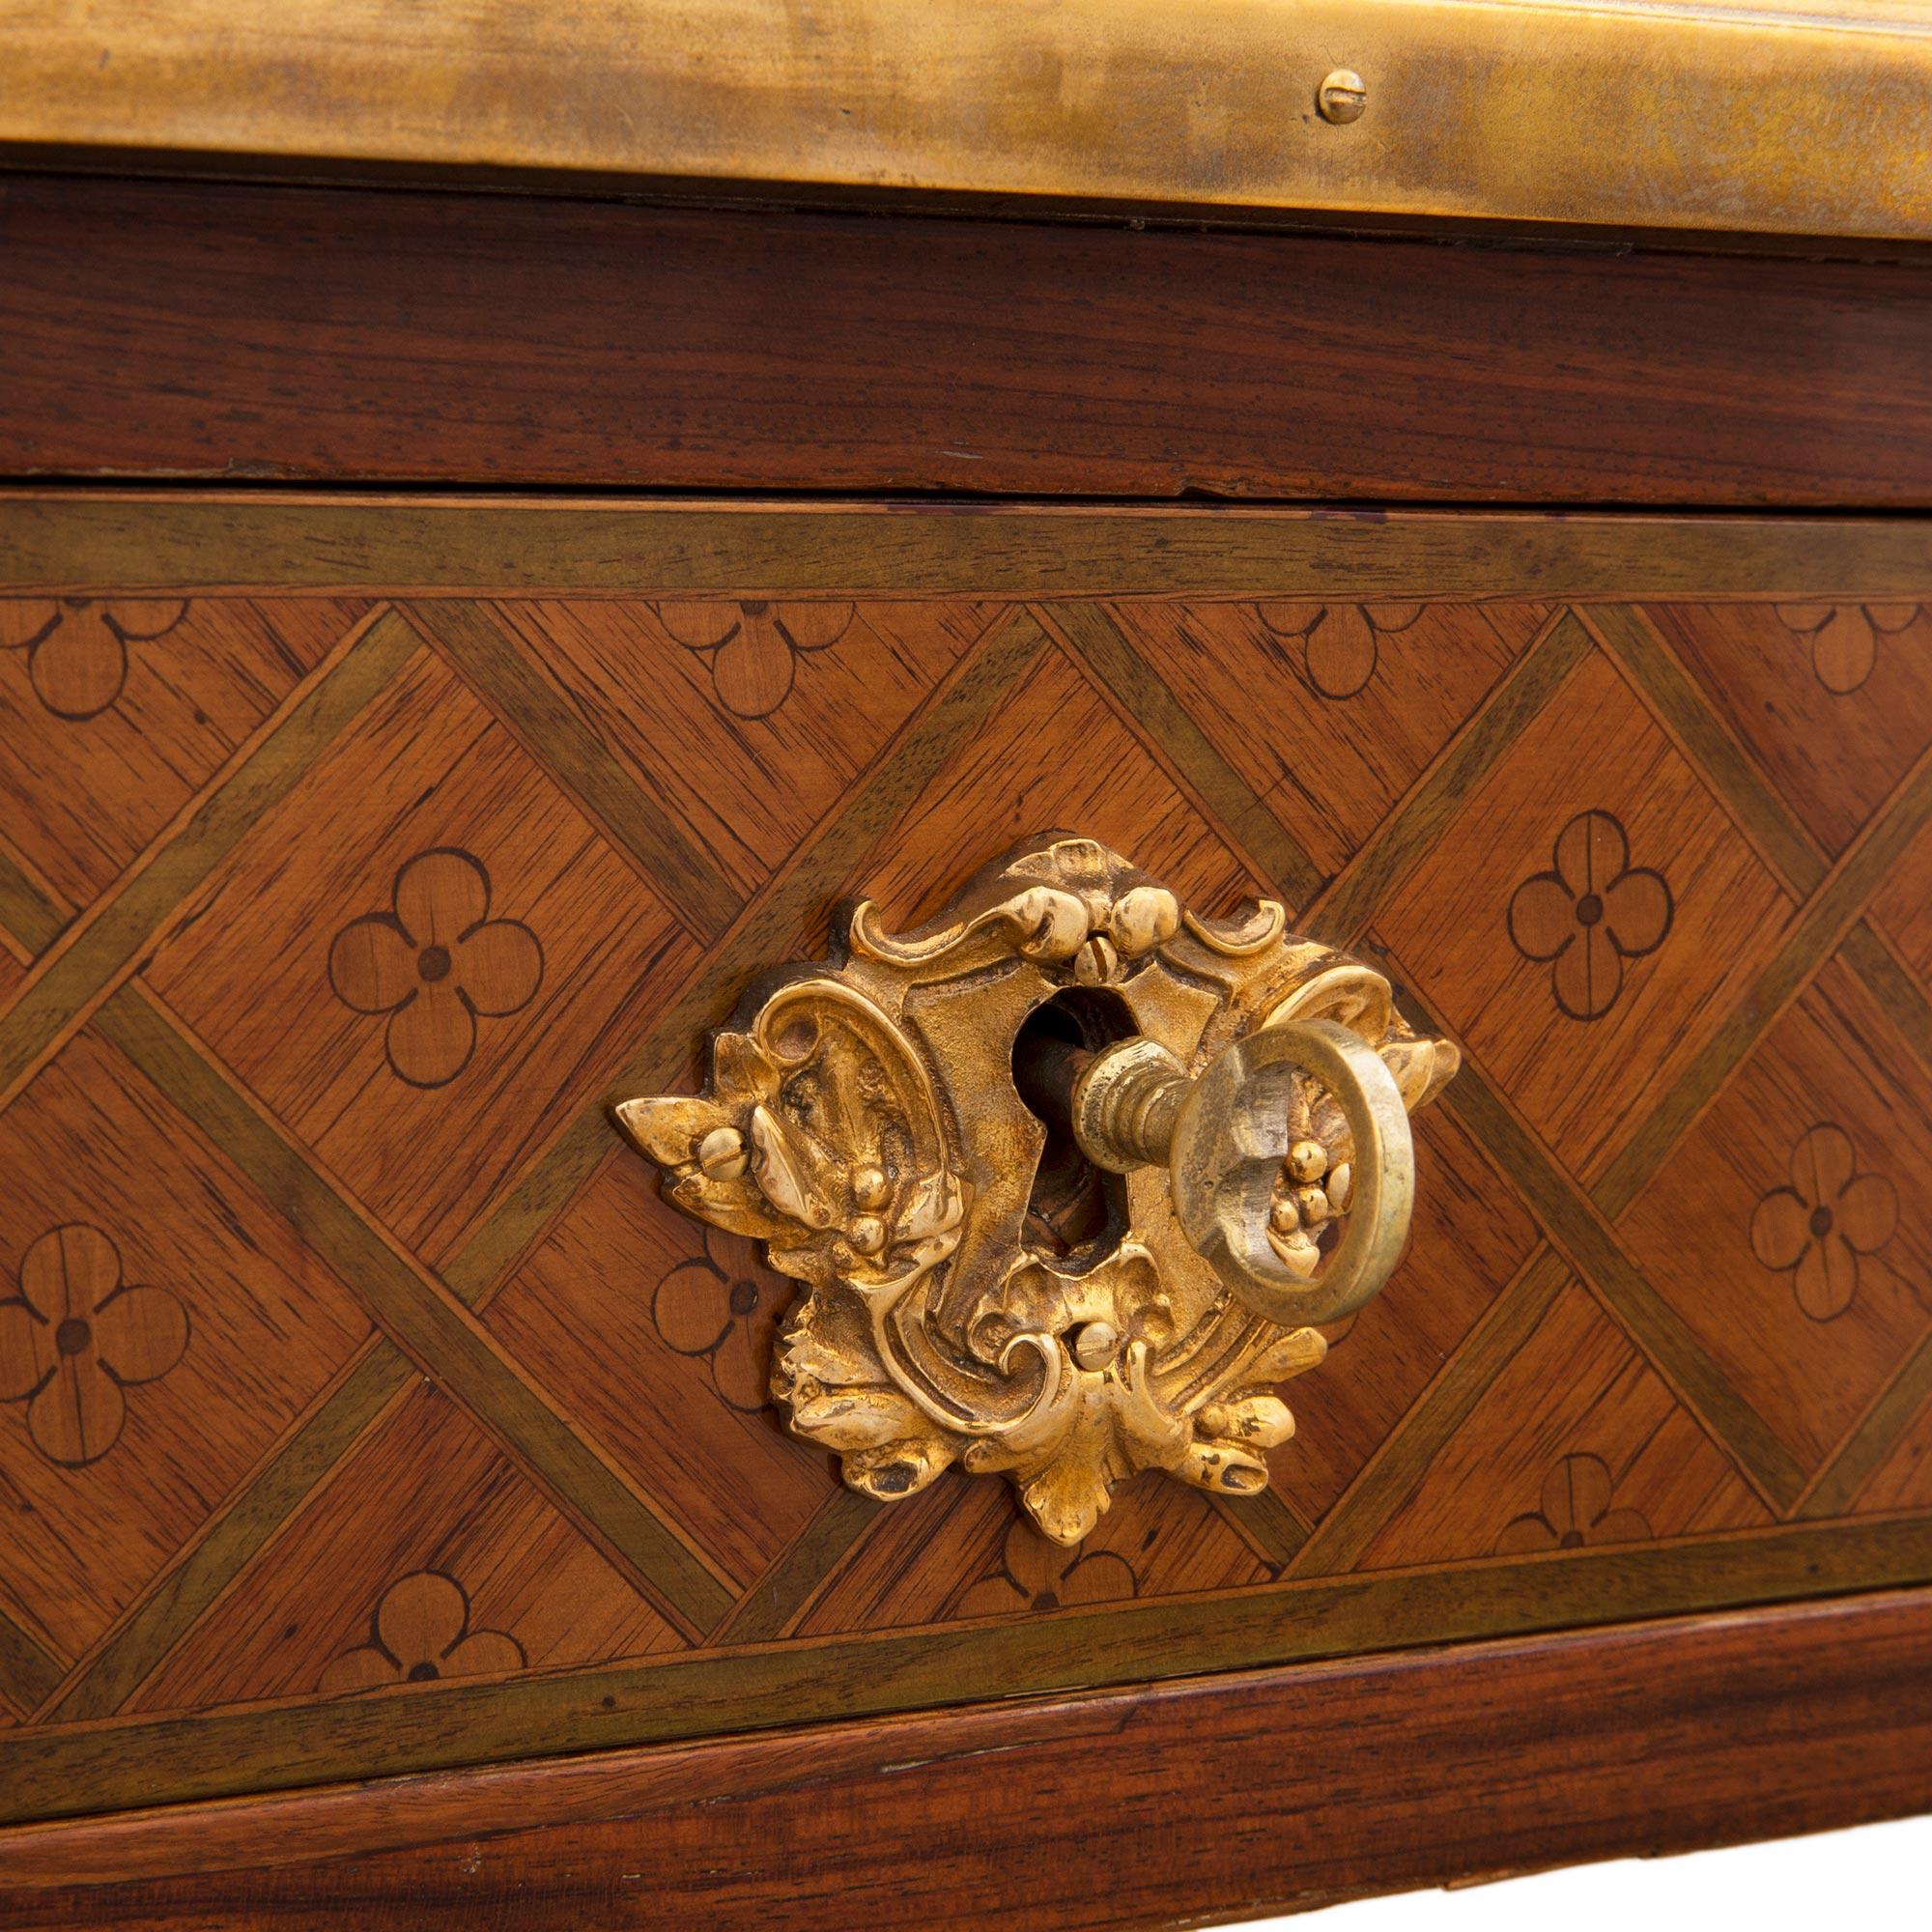 French Mid-19th Century Louis XVI Style Tulipwood, Kingwood and Charmwood Desk For Sale 5